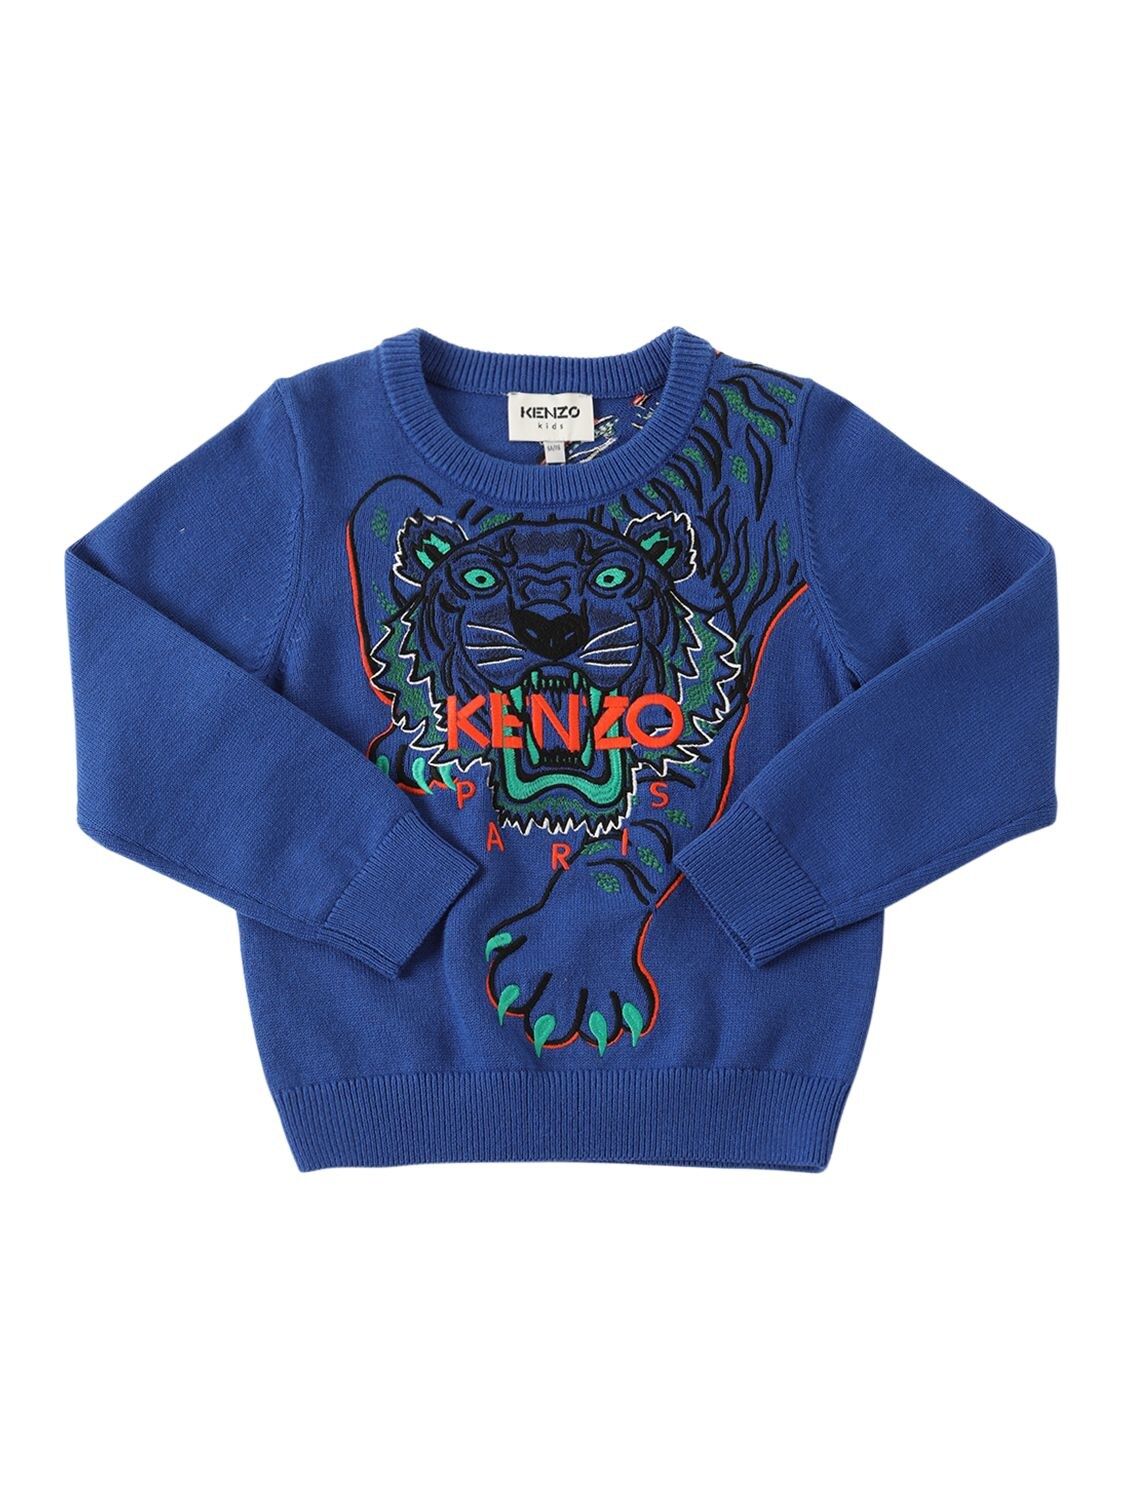 KENZO EMBROIDERED COTTON & CASHMERE SWEATER